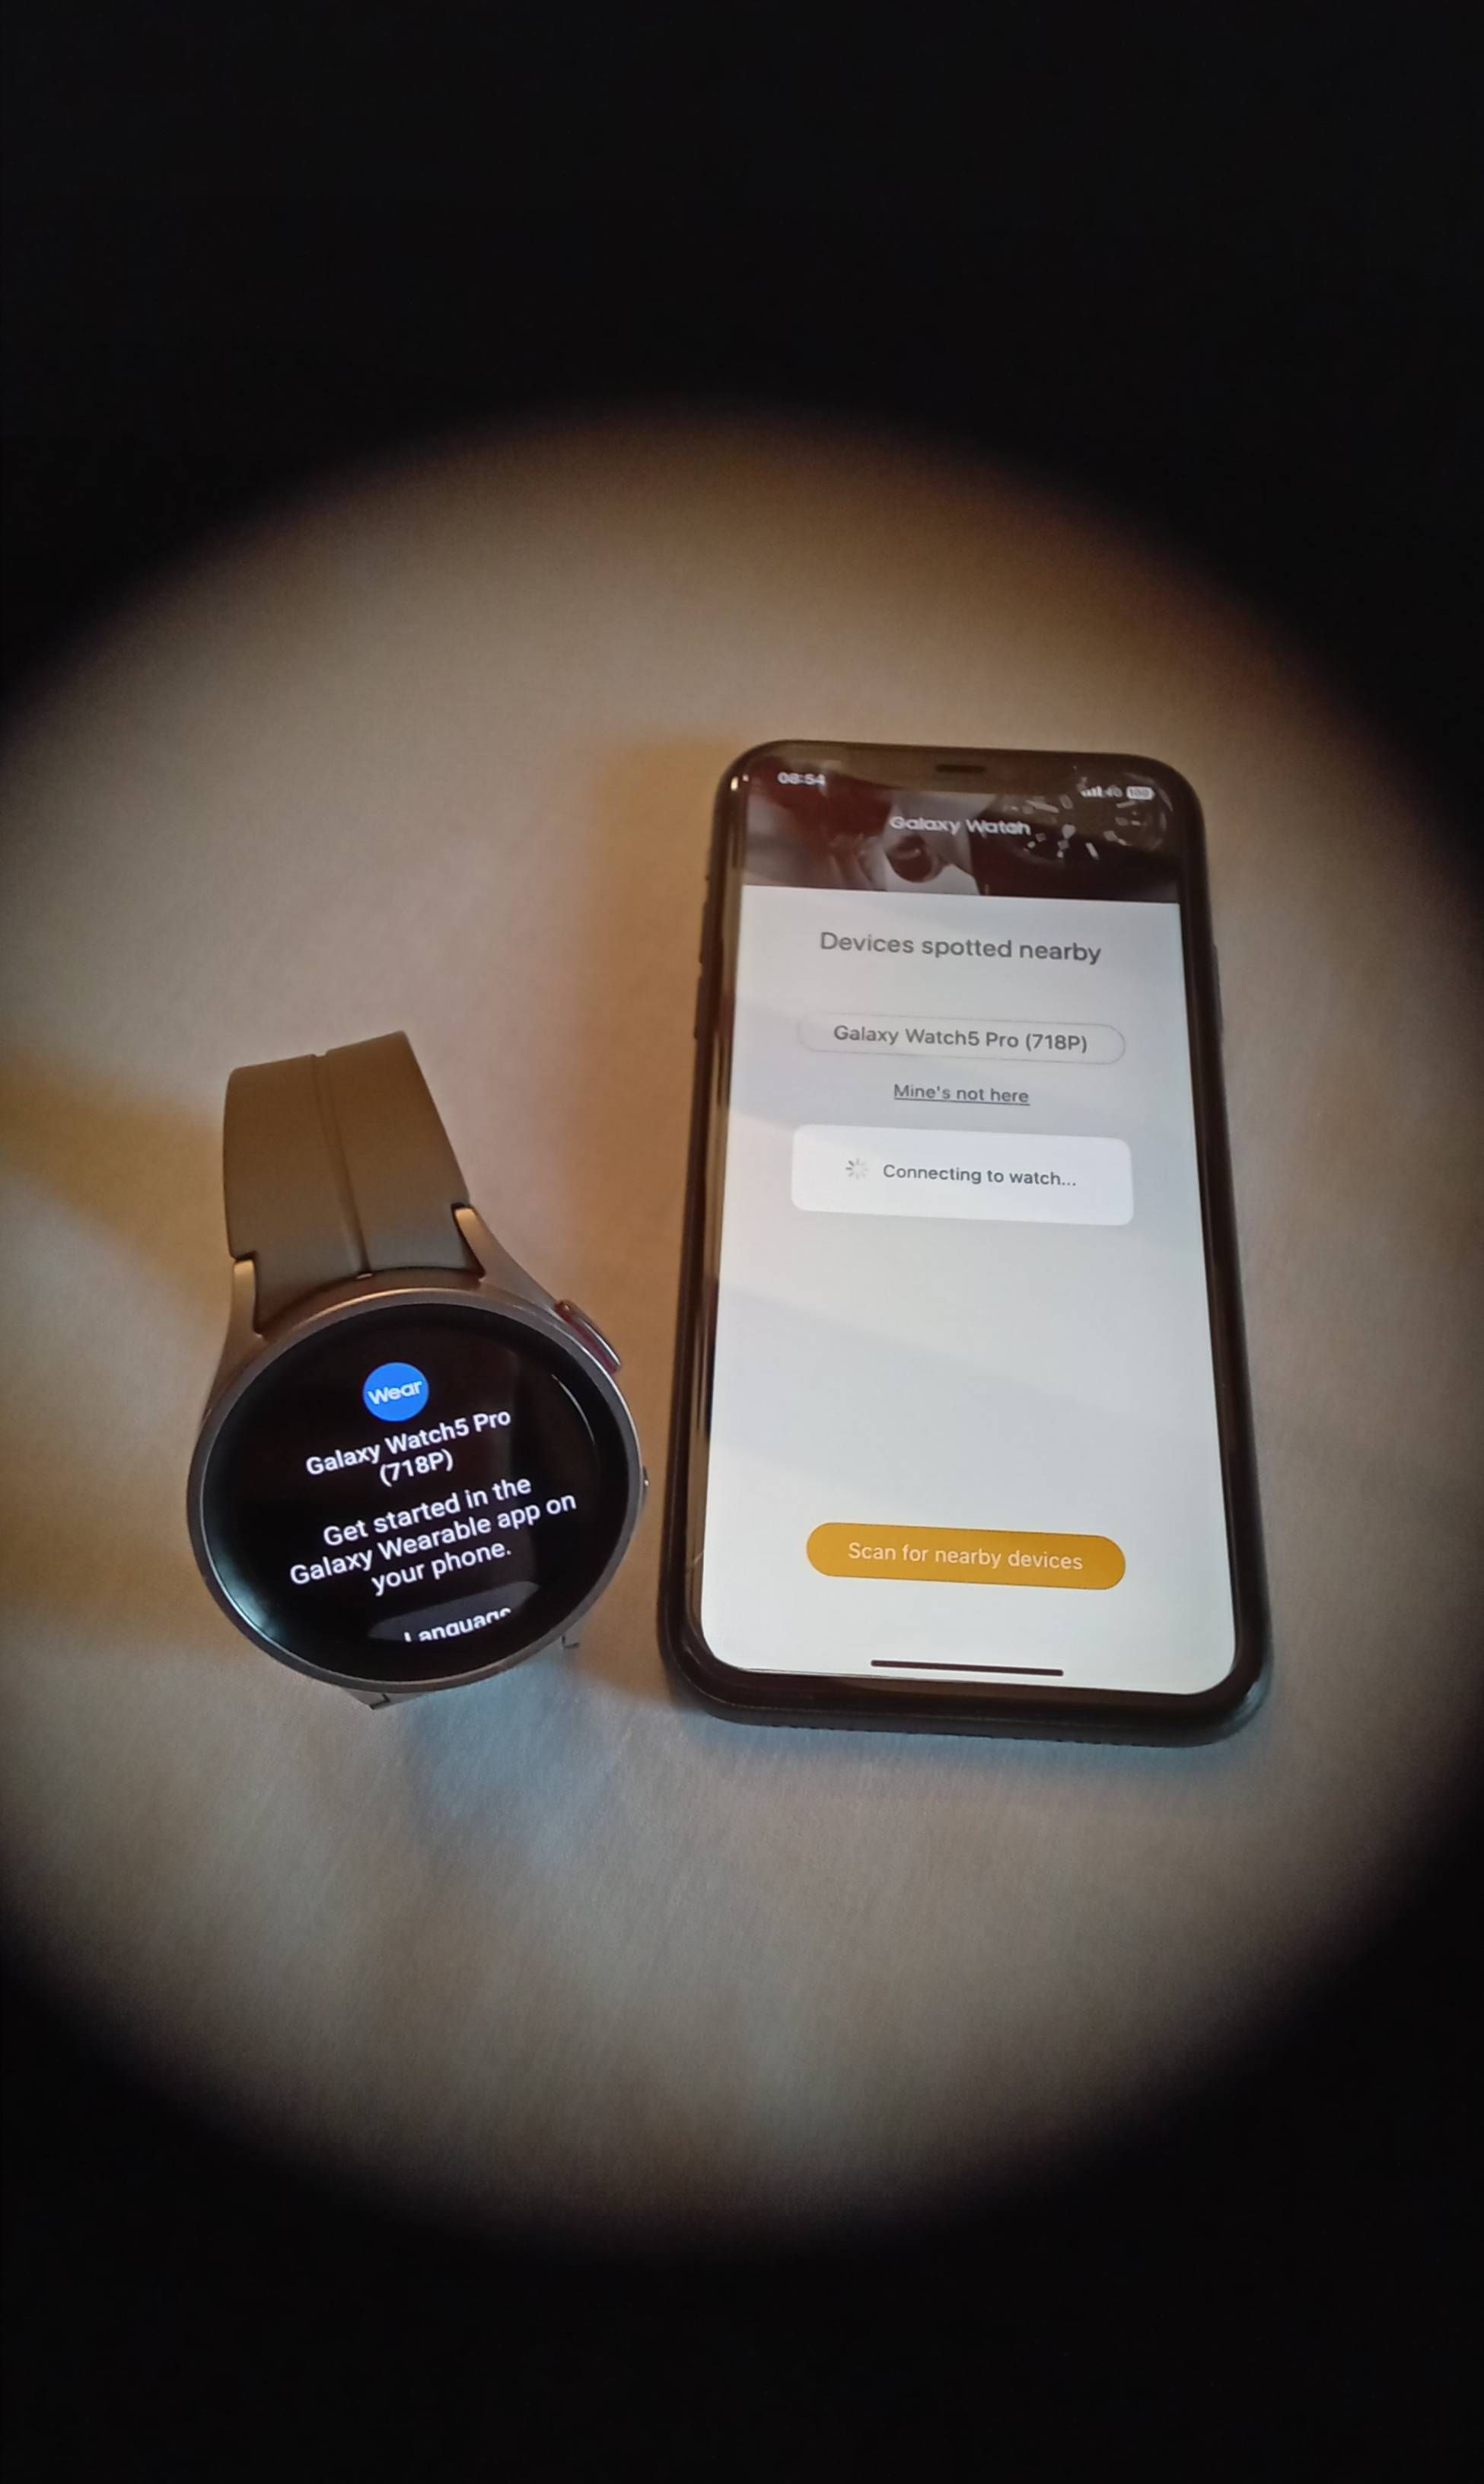 Can't connect using Samsung Watch App on iPhone 11 - Samsung Community